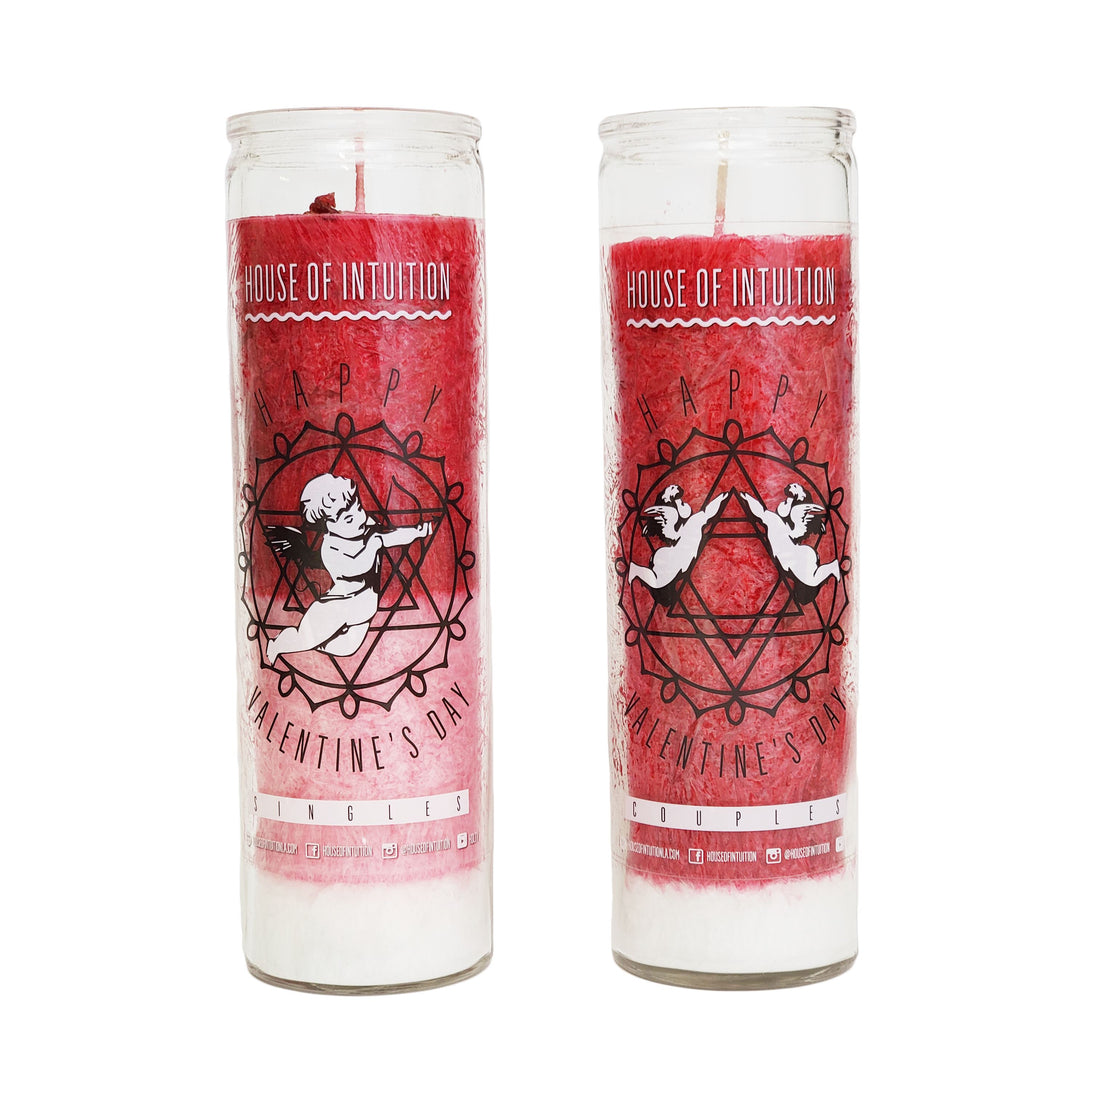 Couples TOGETHER AND STRONGER Magic Candle Limited Edition Candles House of Intuition 